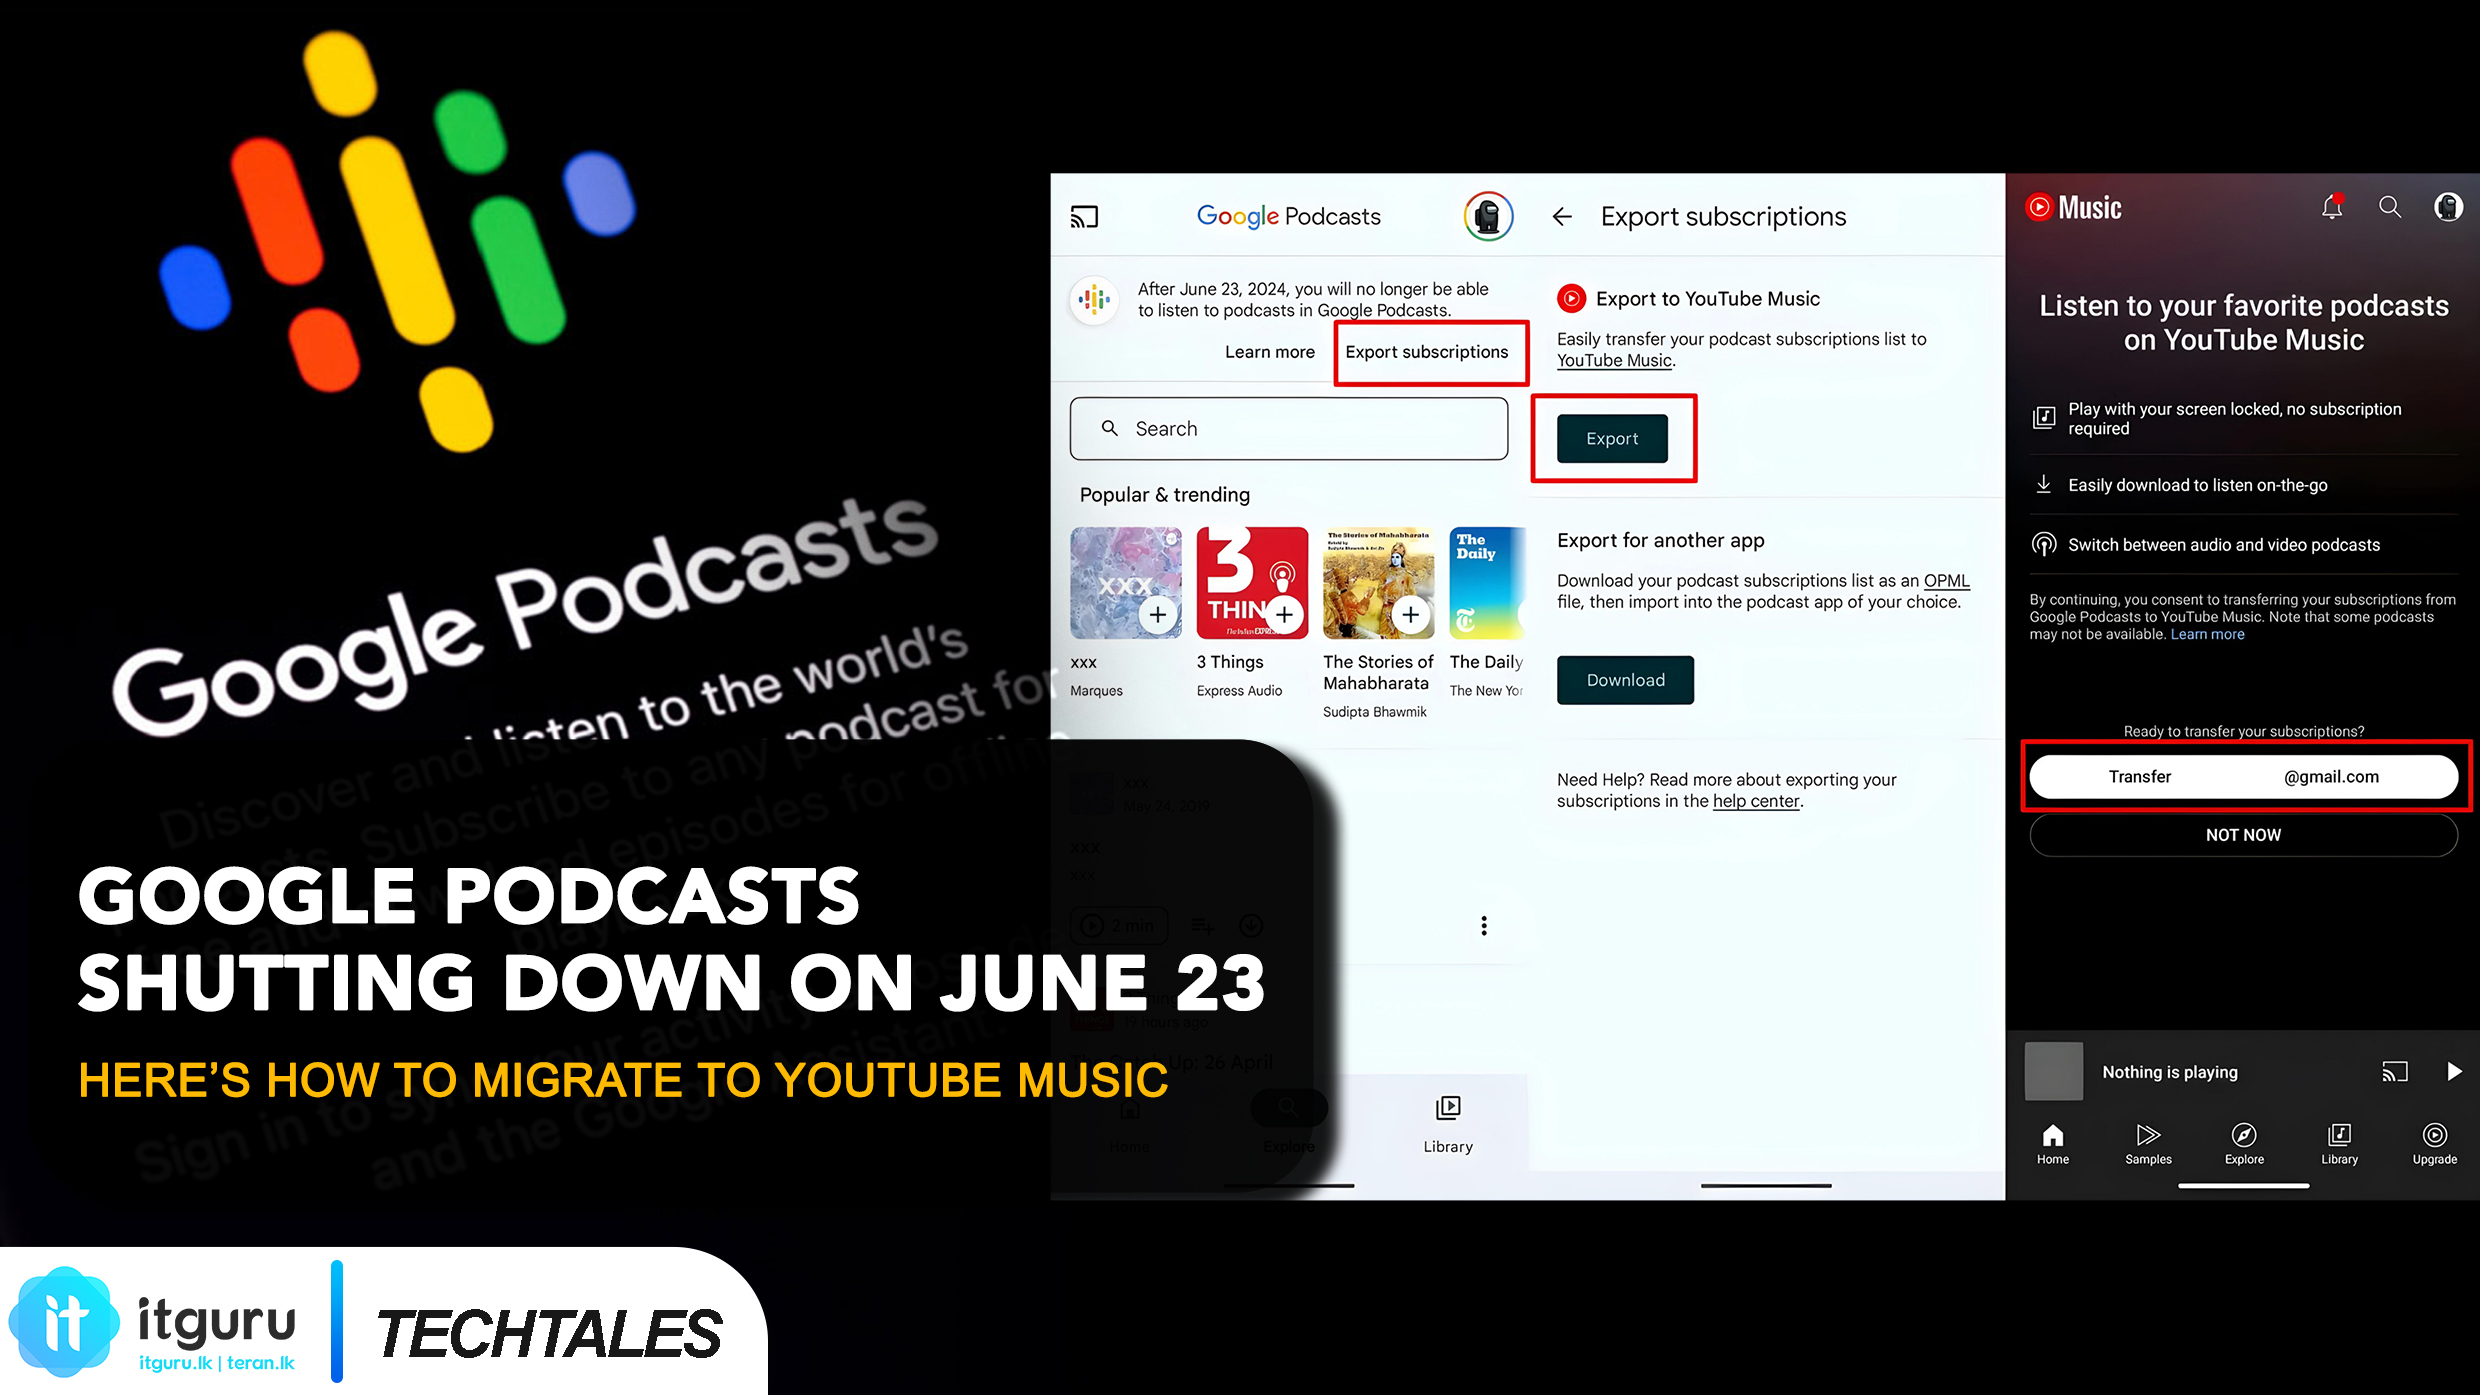 Google Podcasts shutting down on June 23